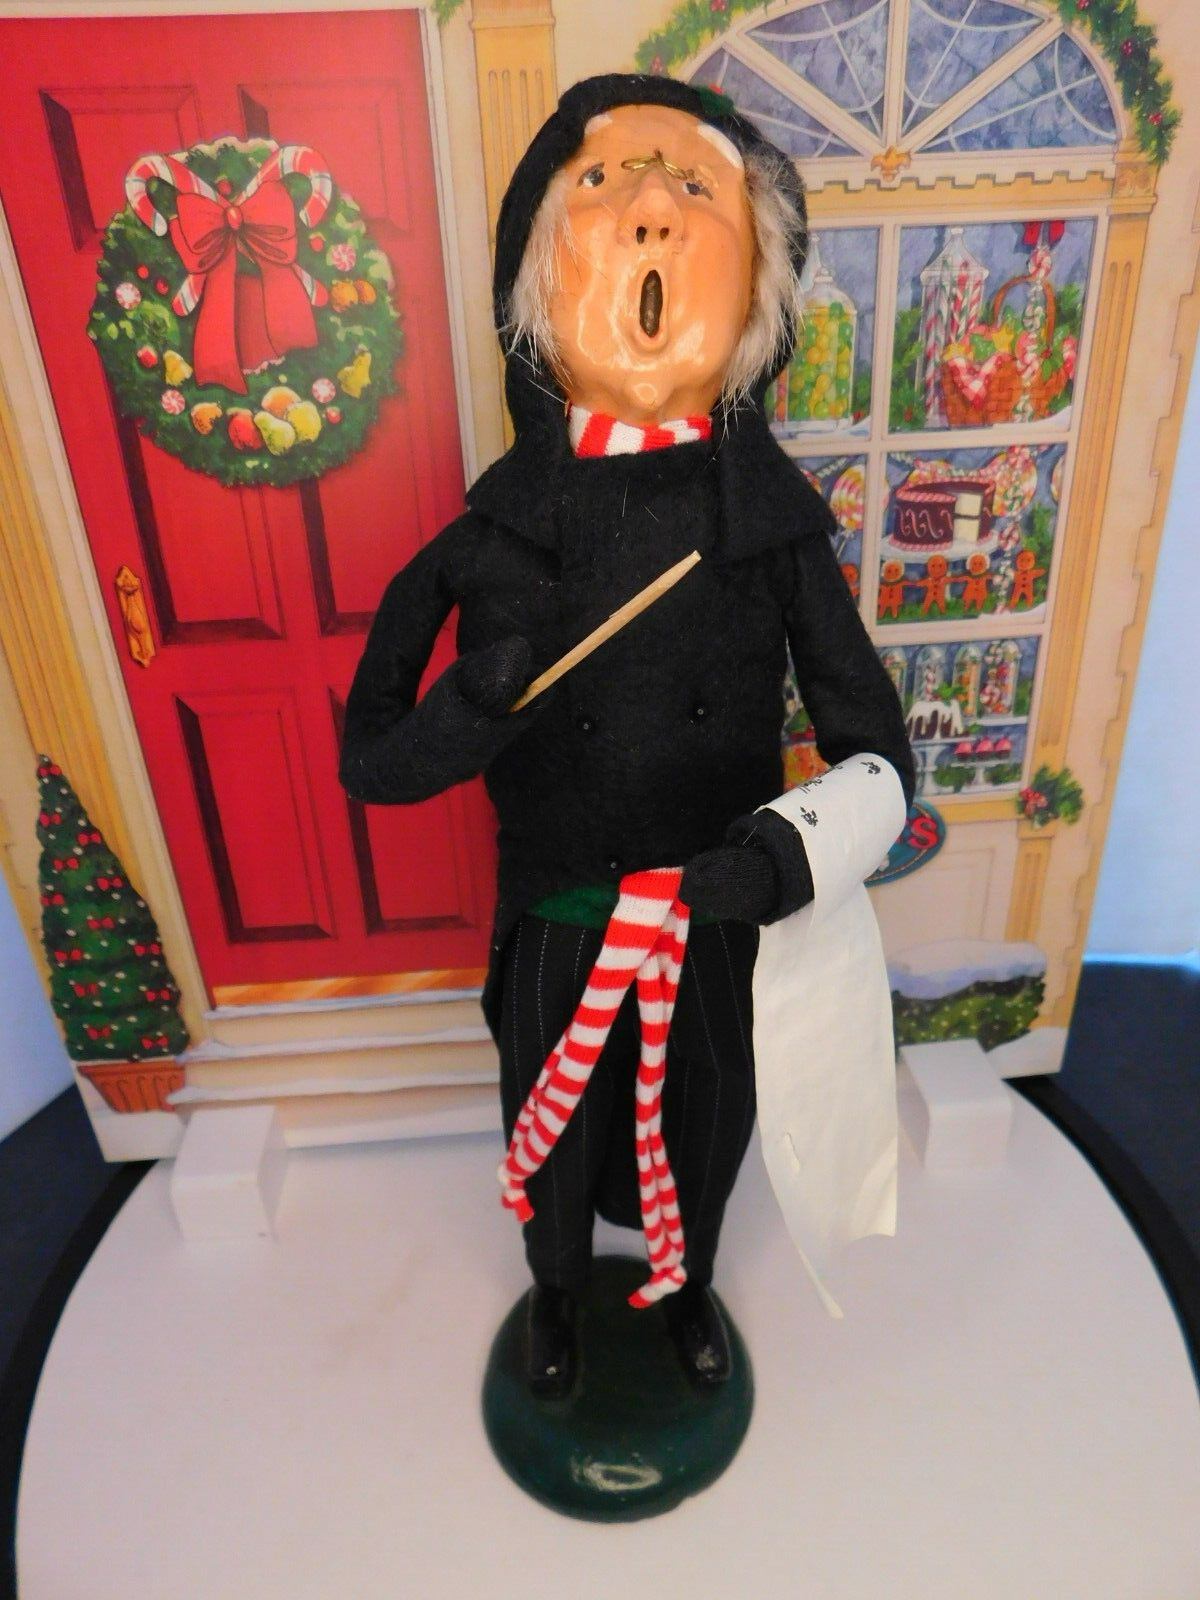 VTG Byers' Choice 1987 Christmas Conductor with Striped Scarf Bumpy Base Signed